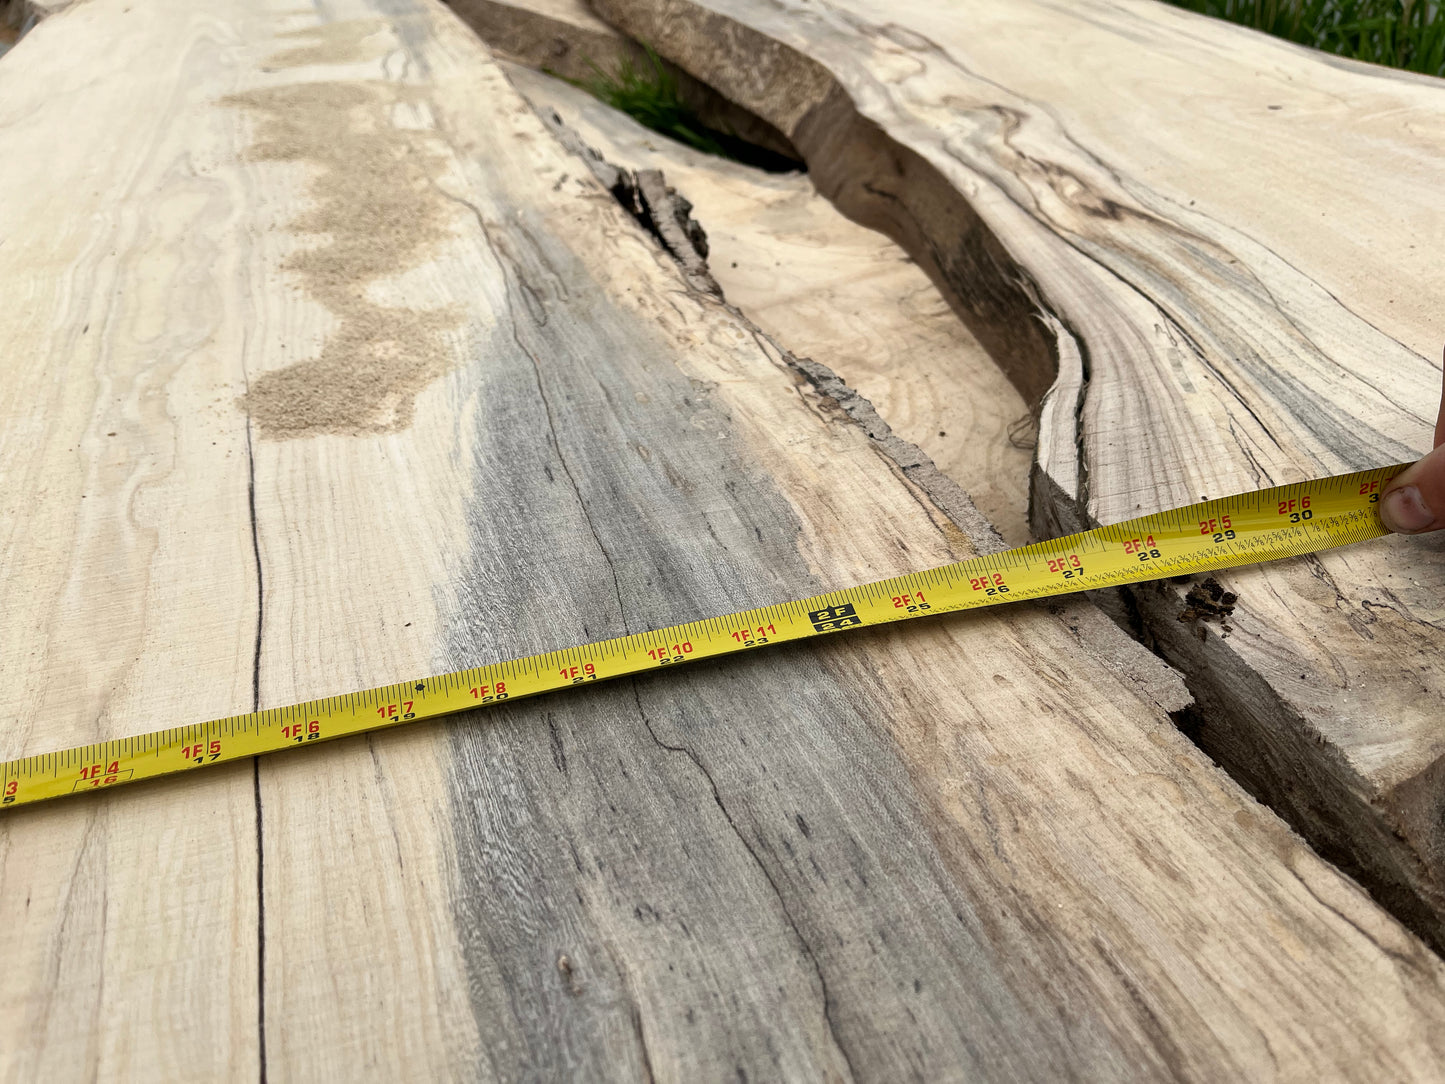 1" Thick Rough Cut Pecan Live Edge Slabs for Charcuterie Boards, Furniture, Tables and Bar Tops, Shelves, and More - Kiln Dried